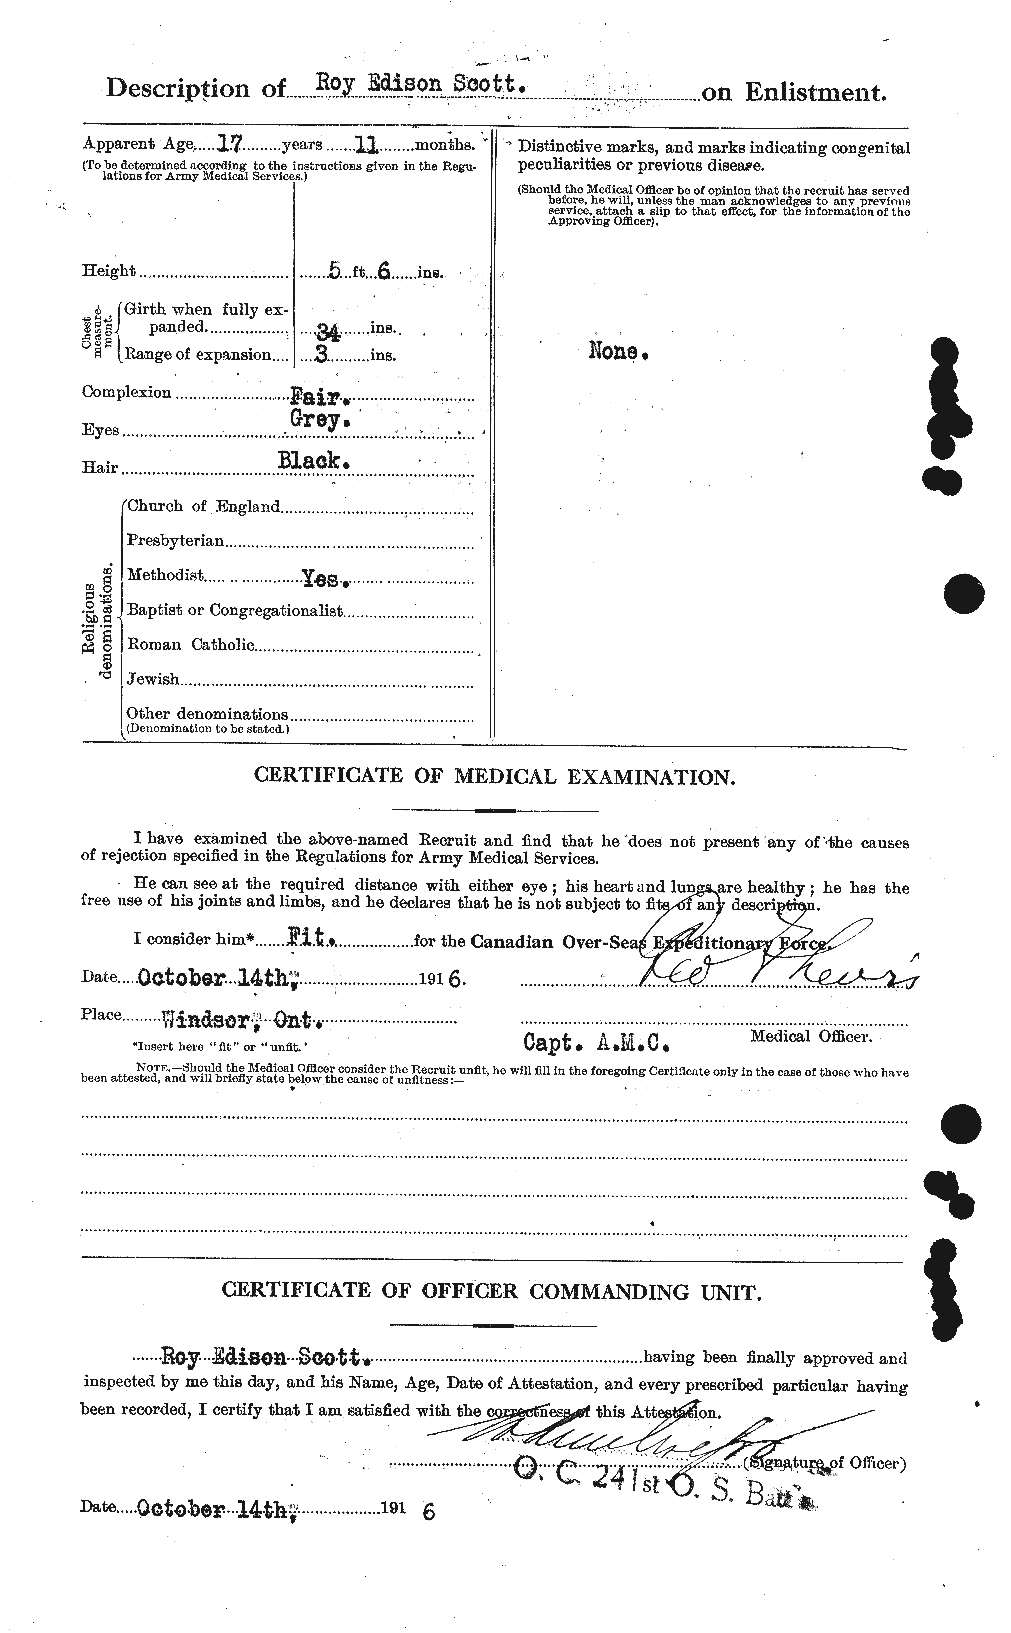 Personnel Records of the First World War - CEF 088883b